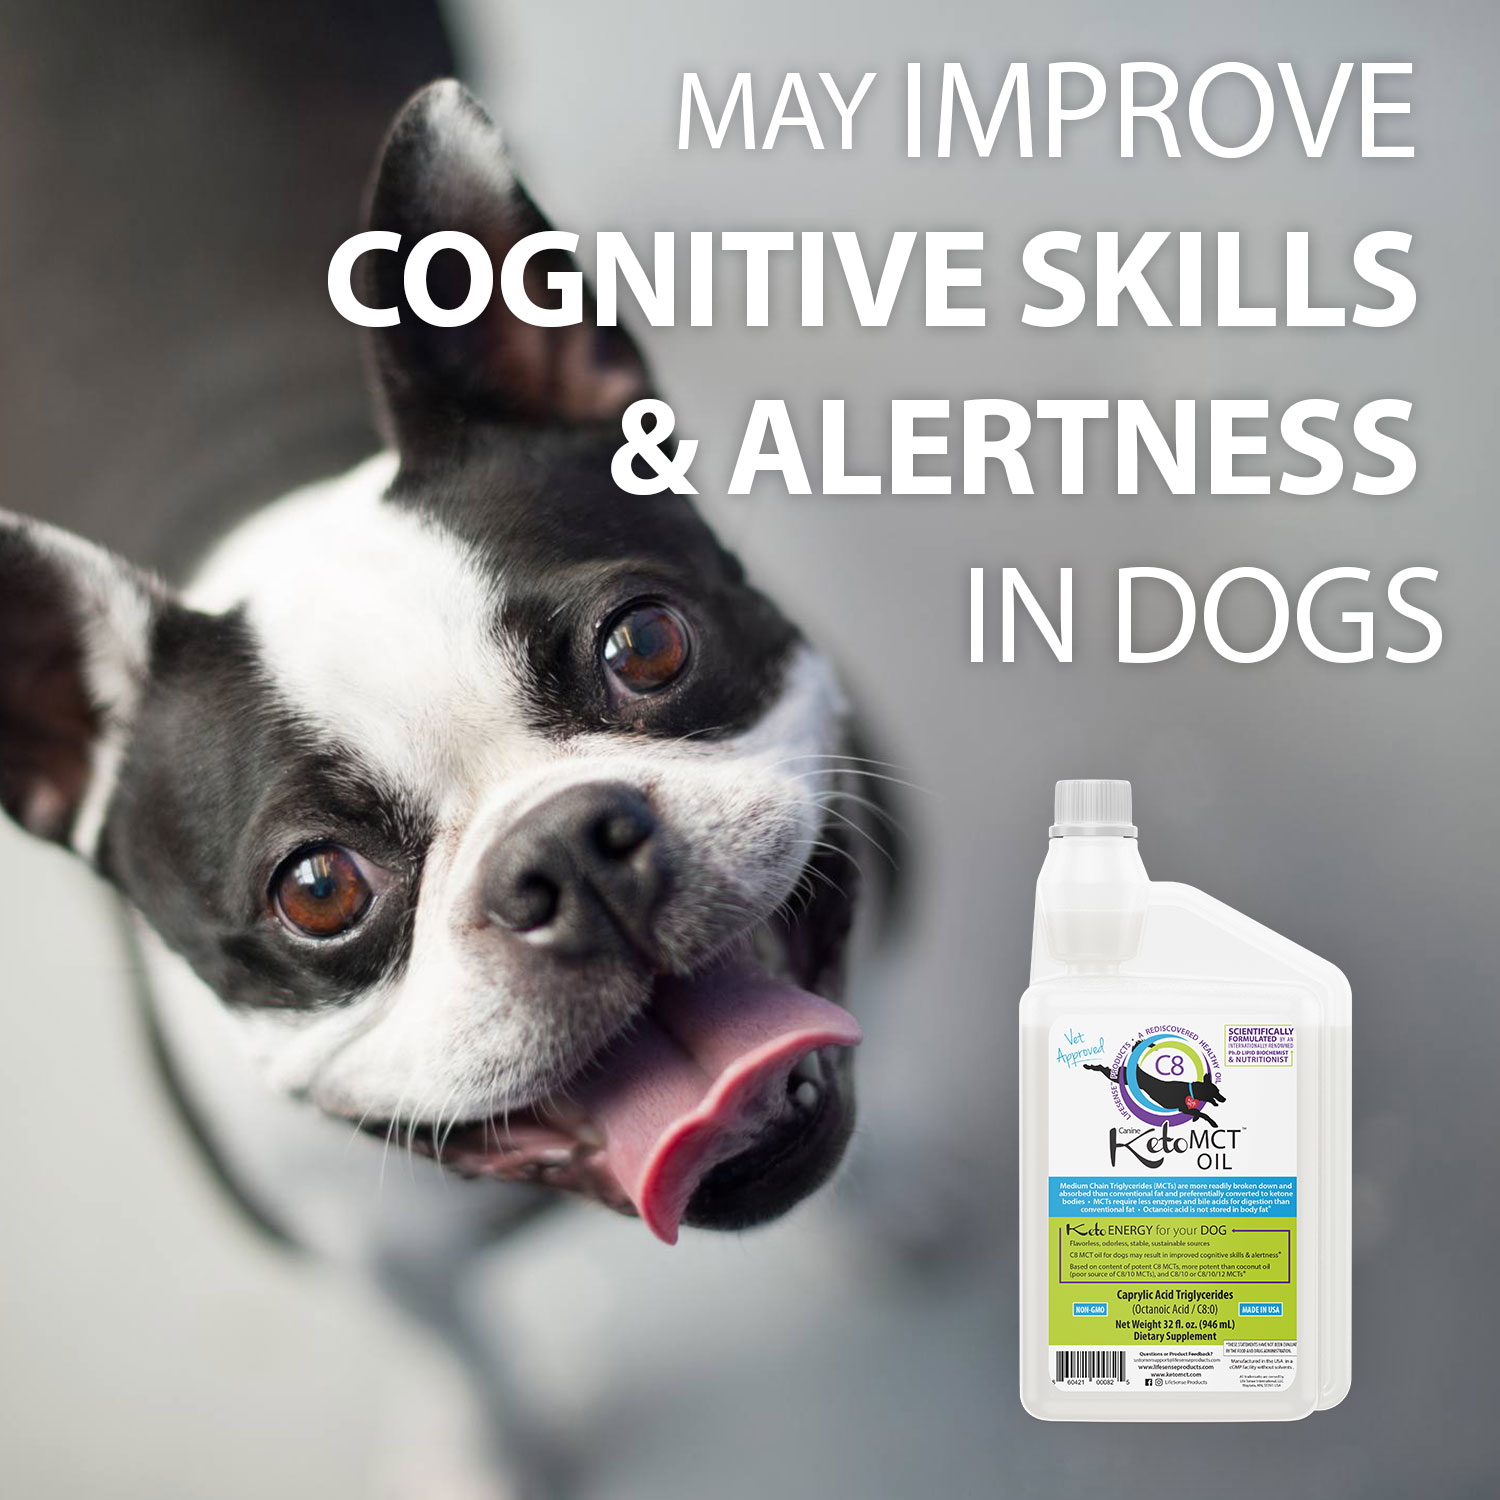 MCT OIL C8 for dogs assists with weight management, improves cognitive skills & alertness for young and senior dogs.